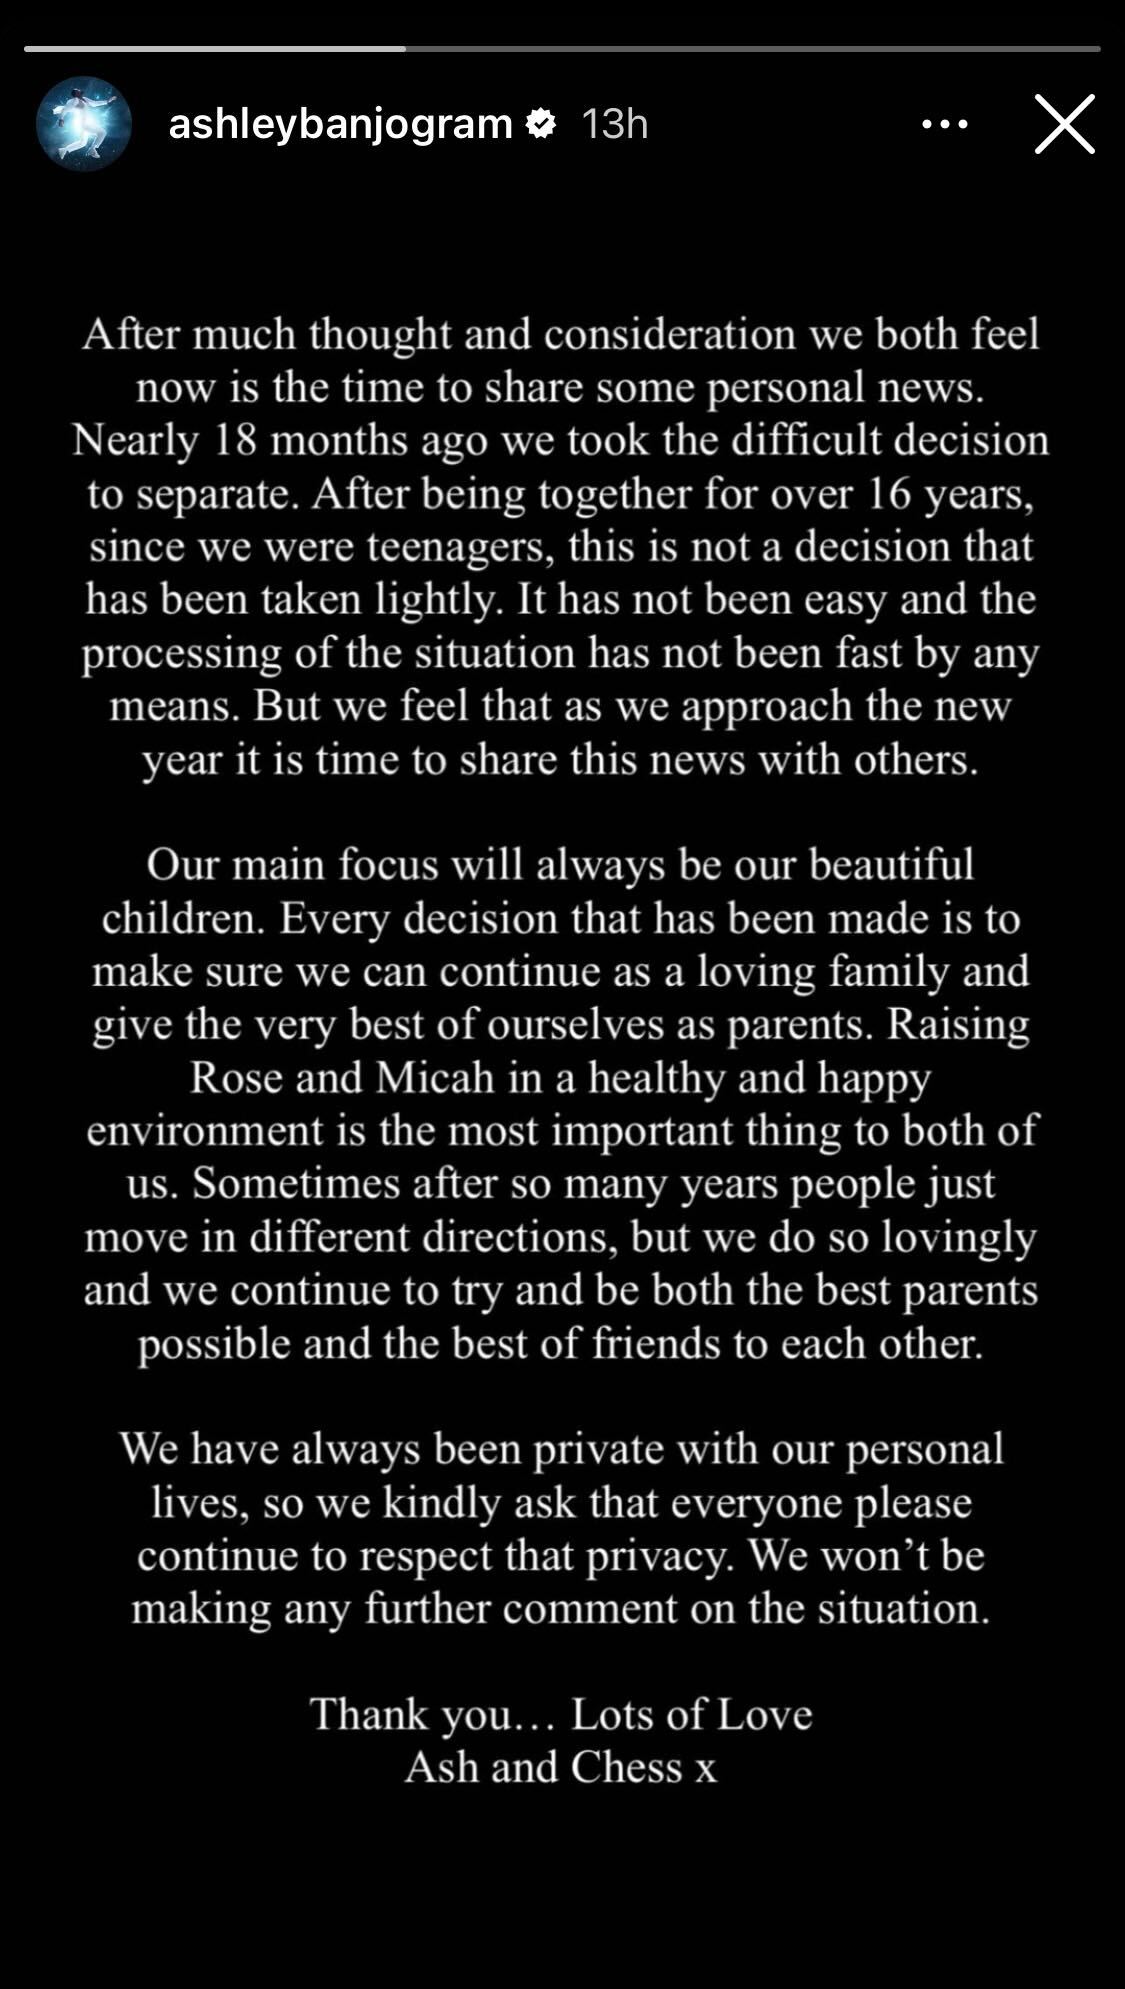 The couple’s statement